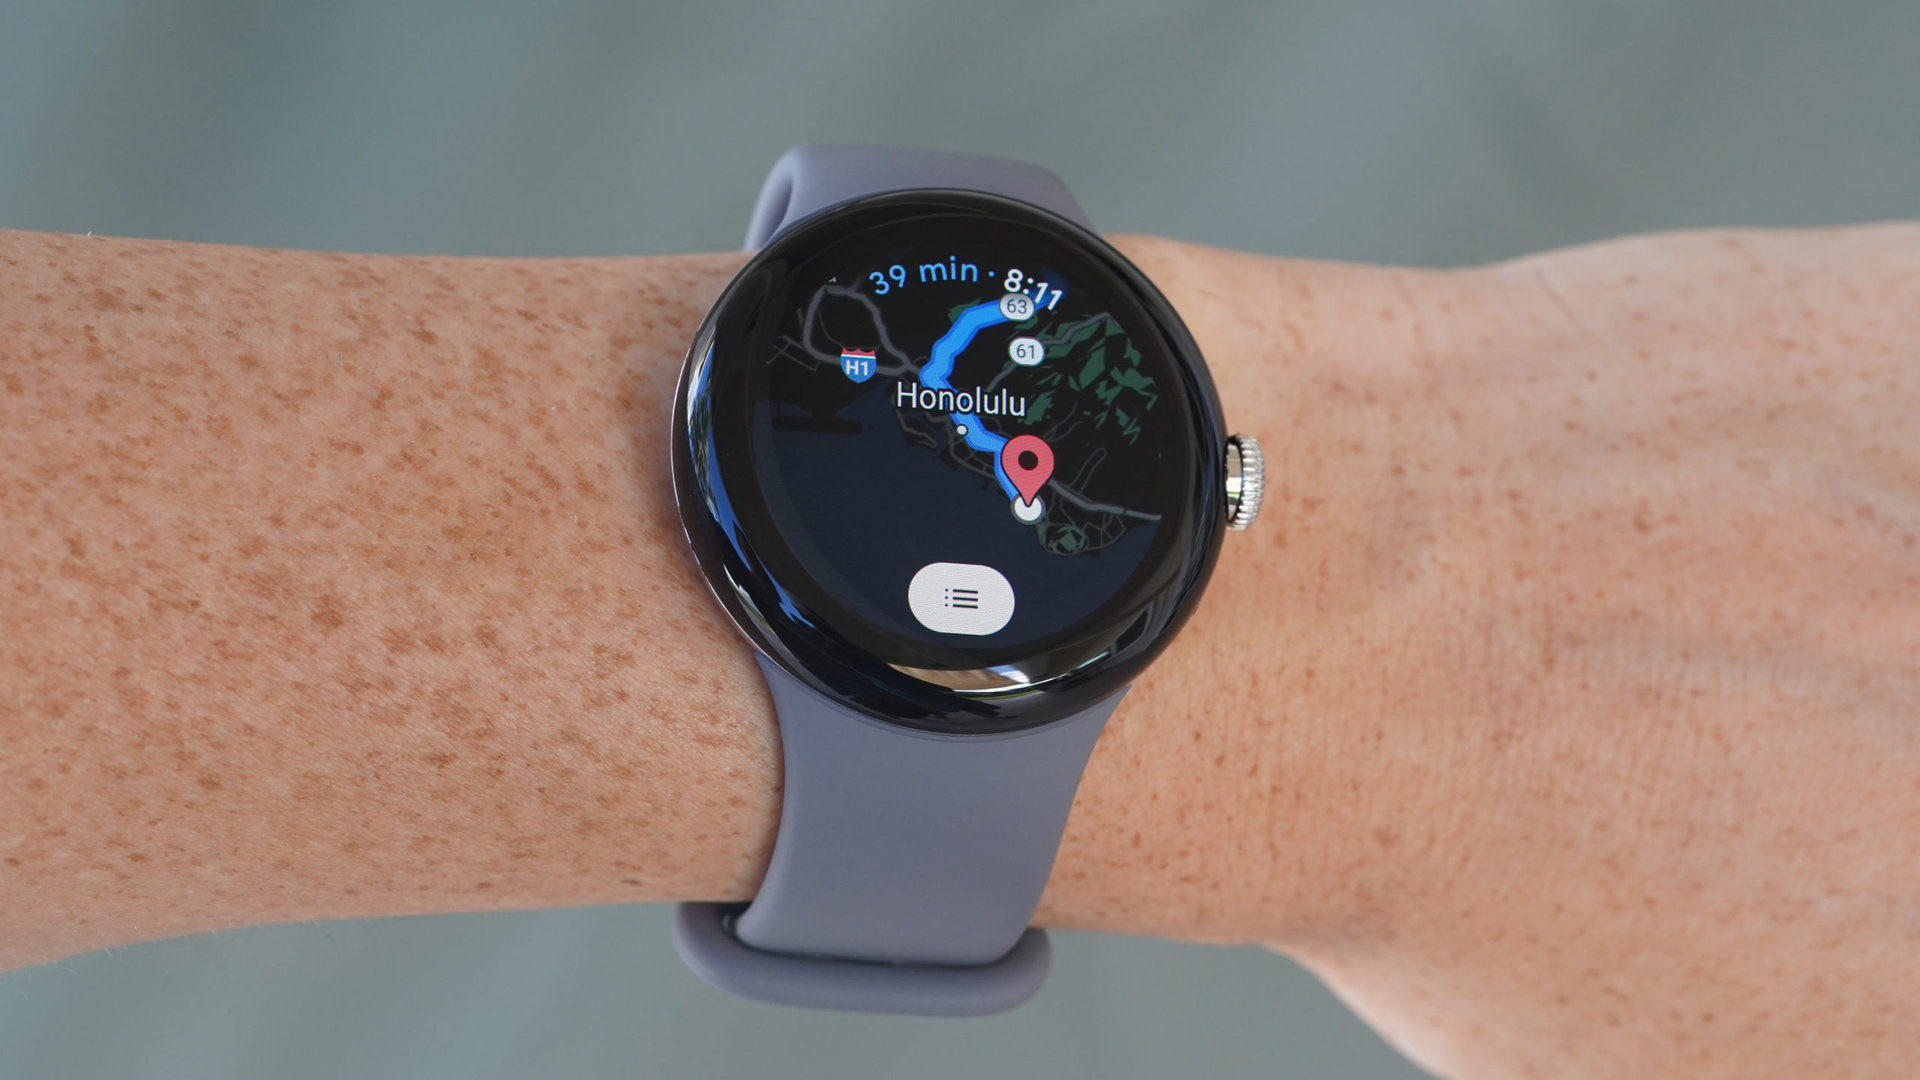 Google announced an update for Maps: the application can now run on Wear OS watches with LTE without tethering to a smartphone